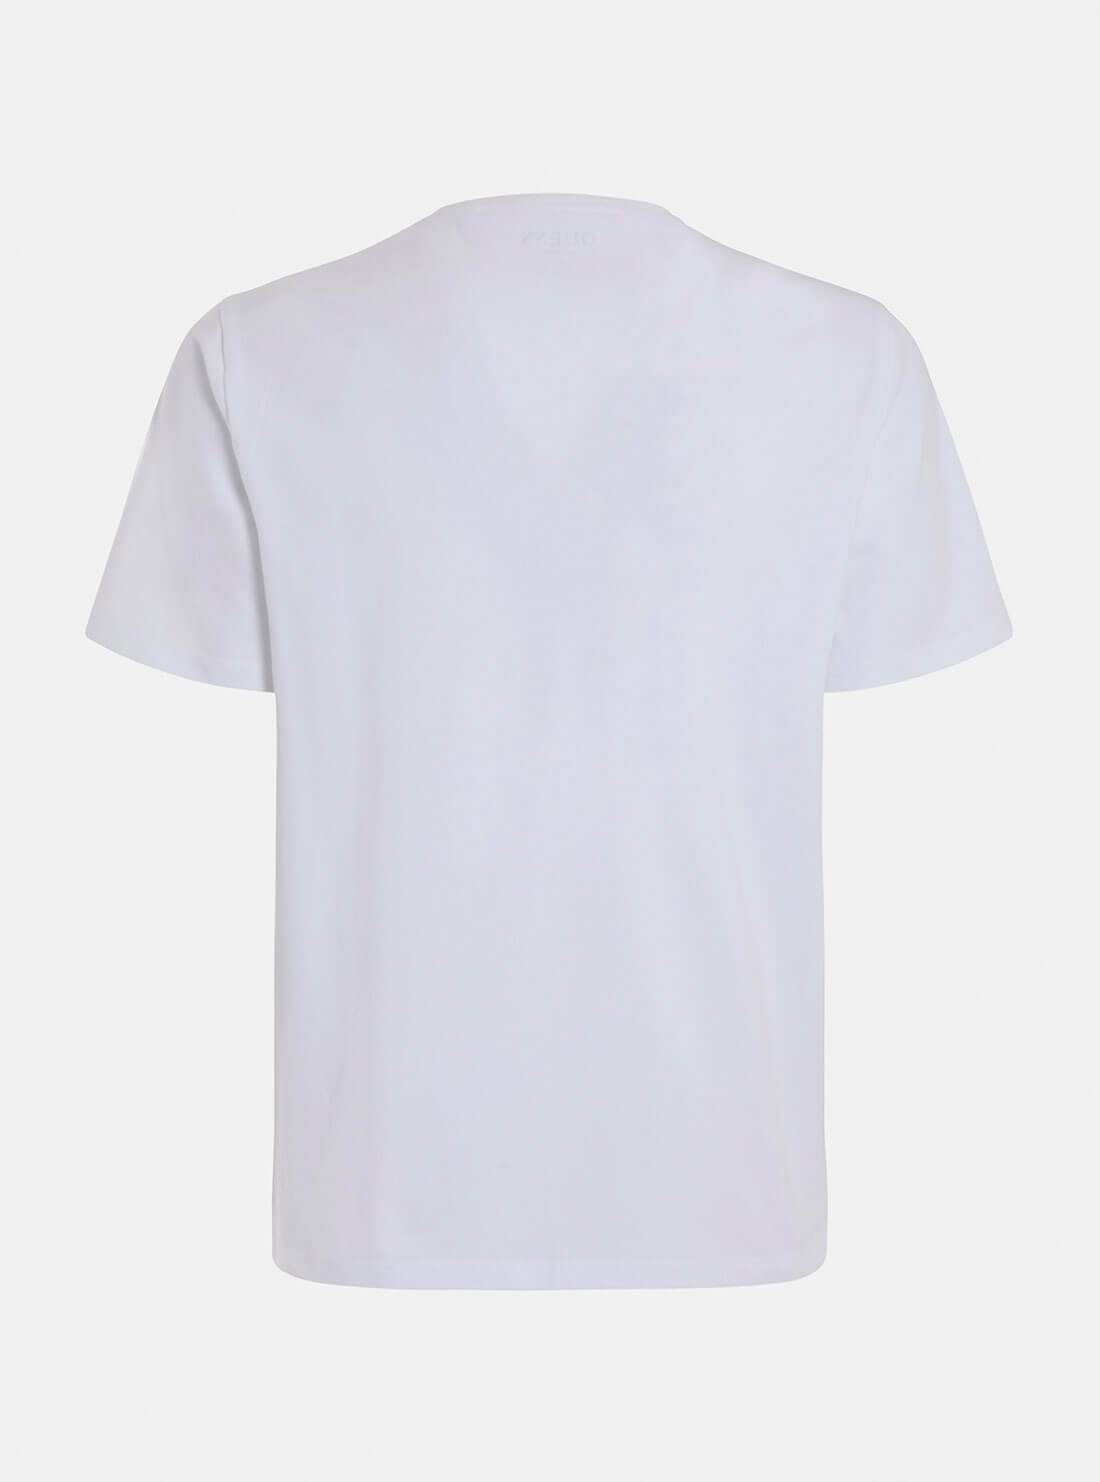 GUESS Mens Eco White Orwell Logo T-Shirt M2GI09J1311 Ghost Back View